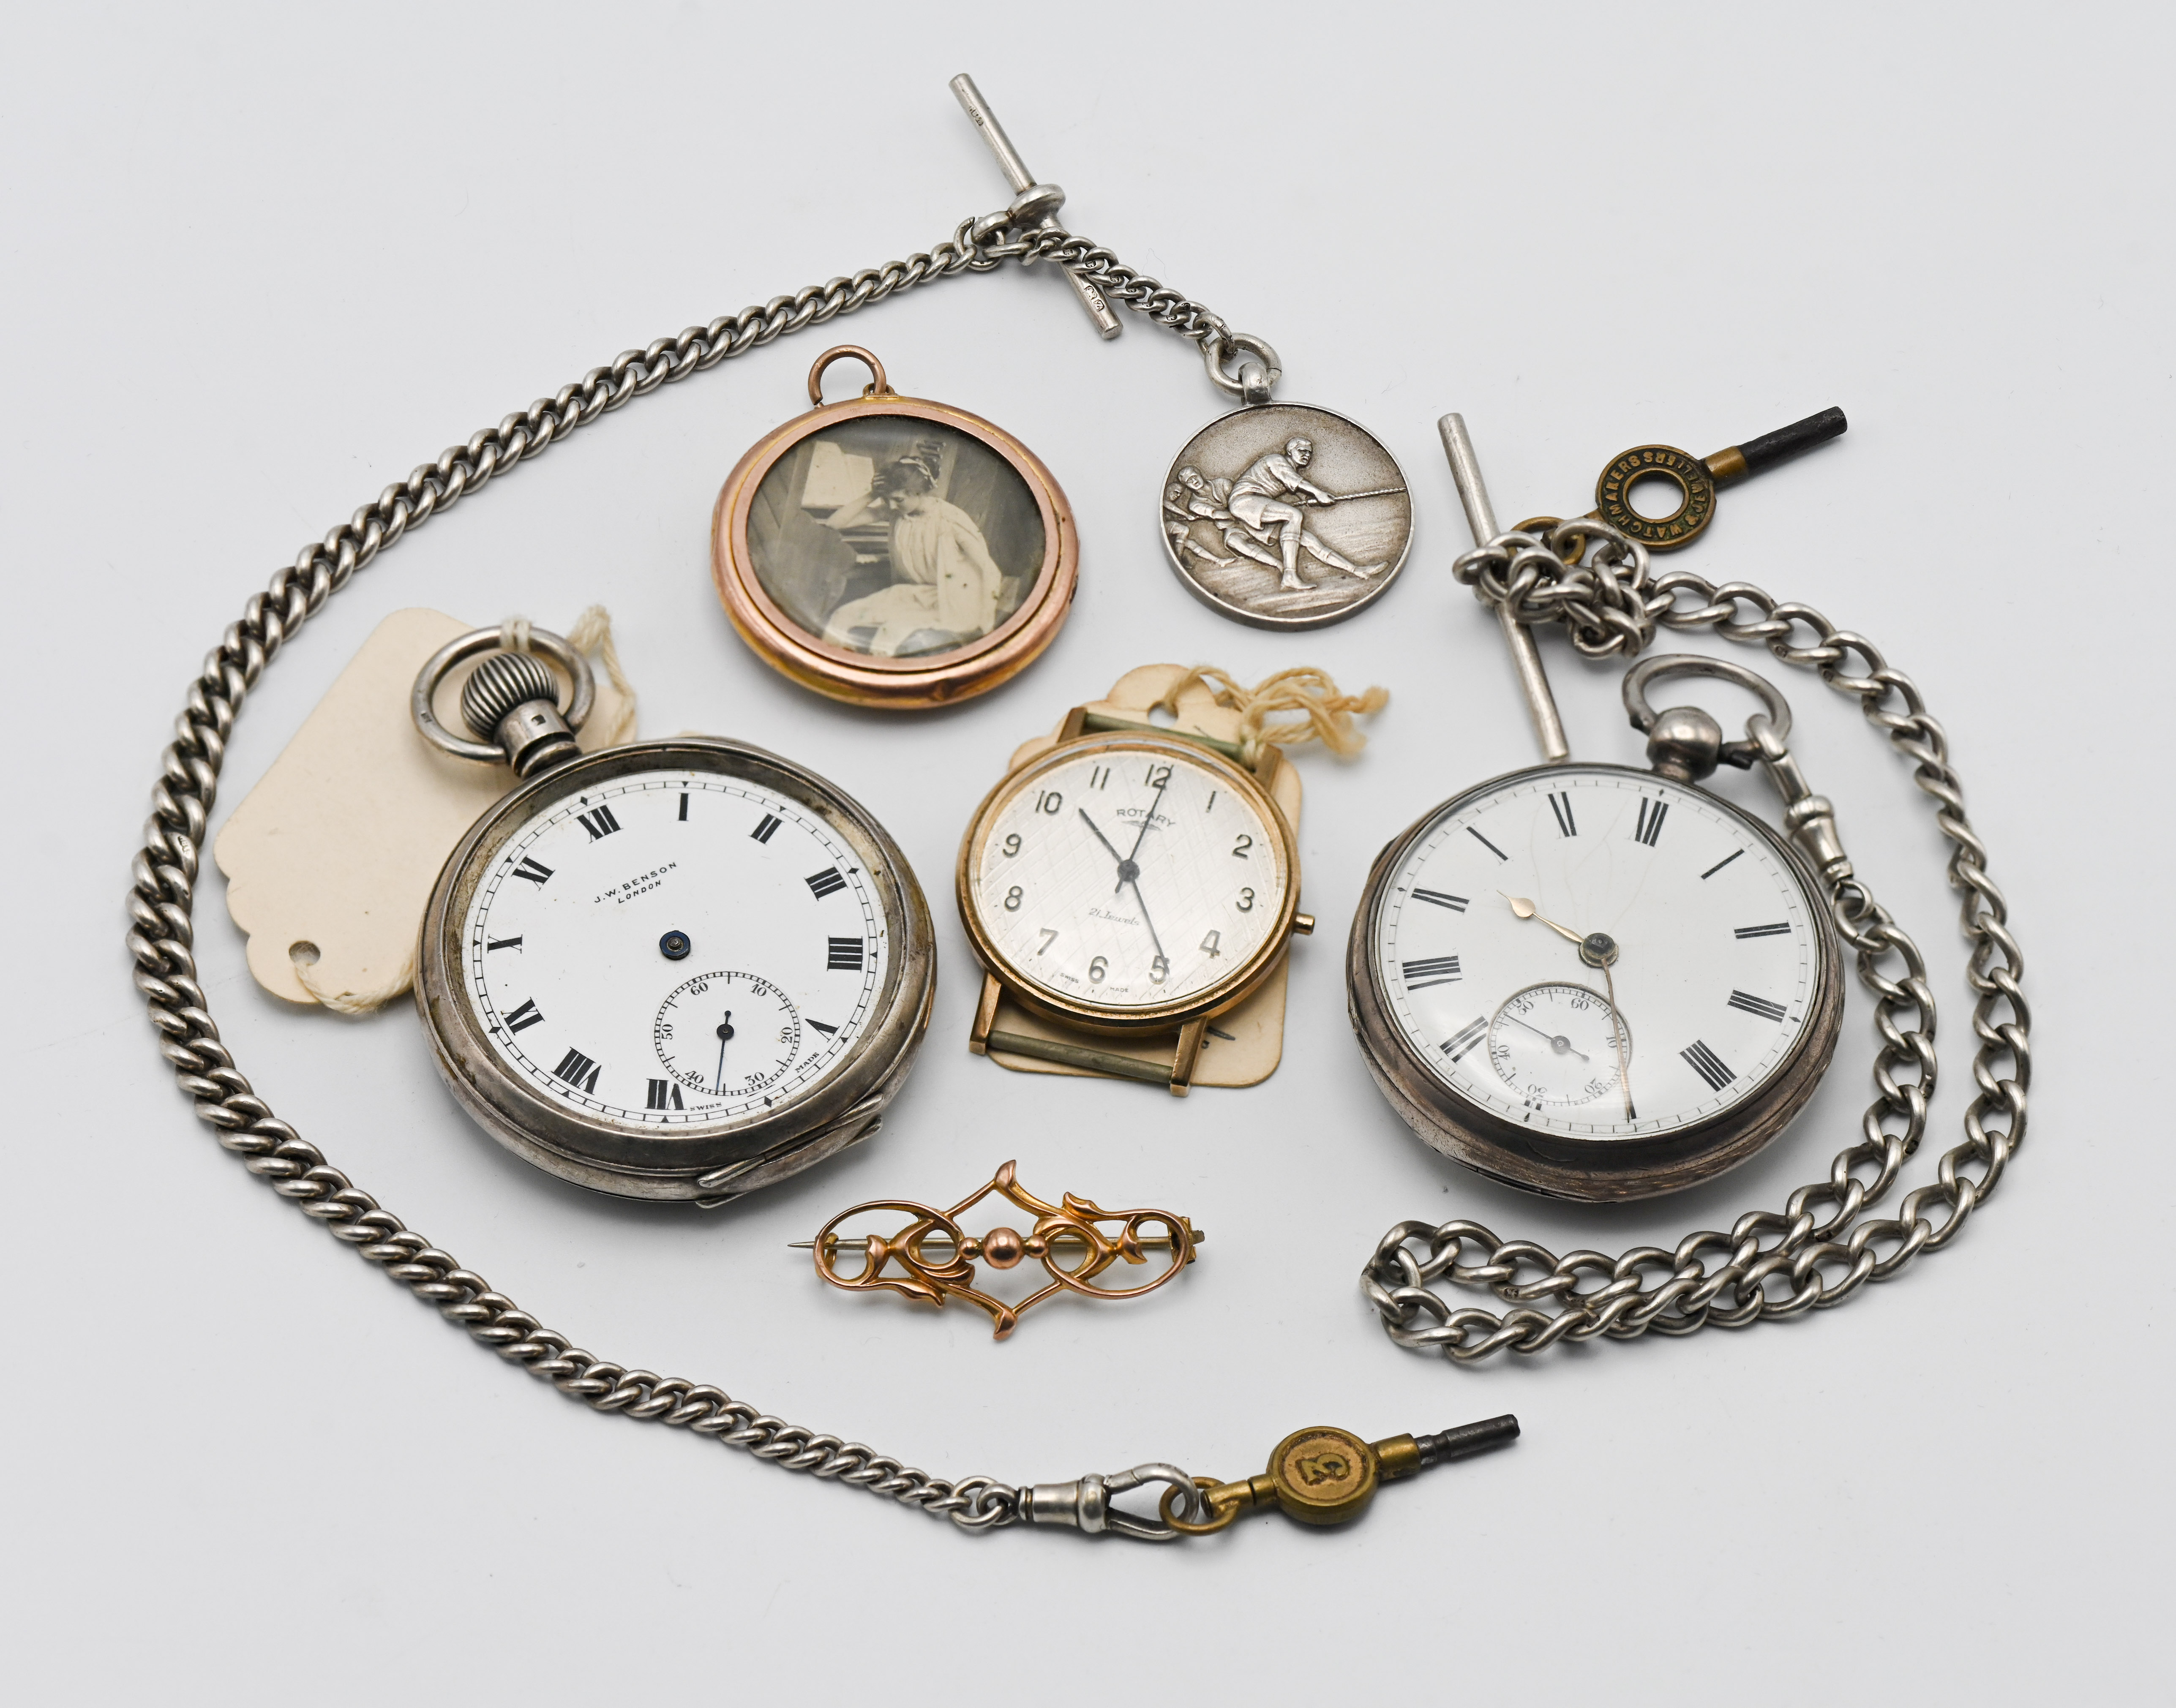 A mixed collection including a J.W. Benson pocket watch, a silver pocket watch on a silver watch